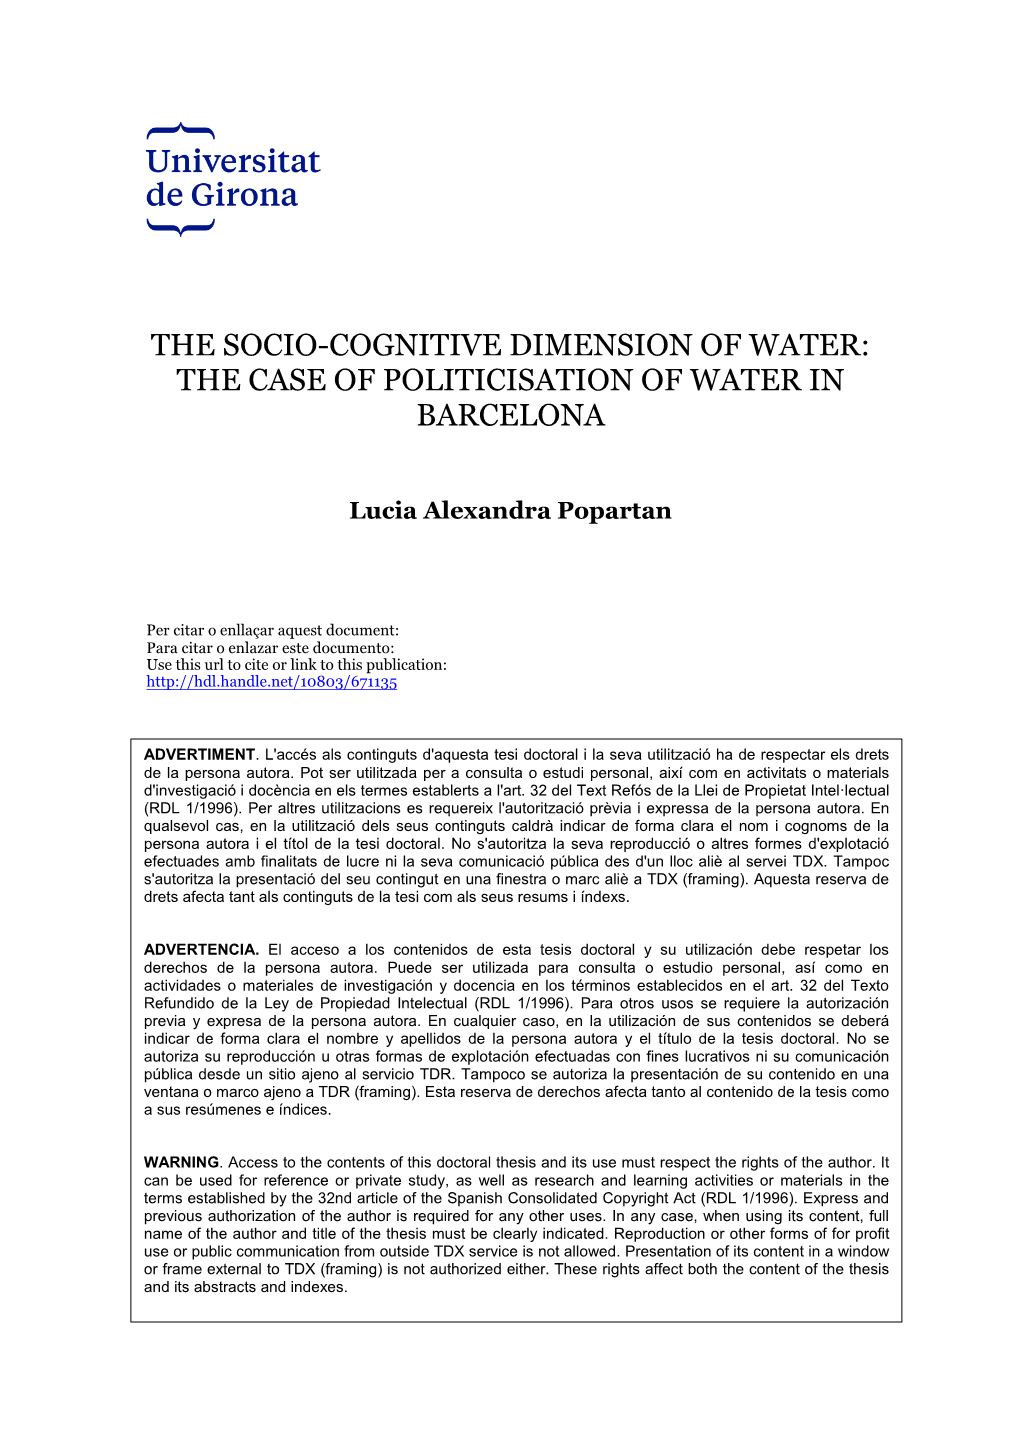 The Socio-Cognitive Dimension of Water: the Case of Politicisation of Water in Barcelona